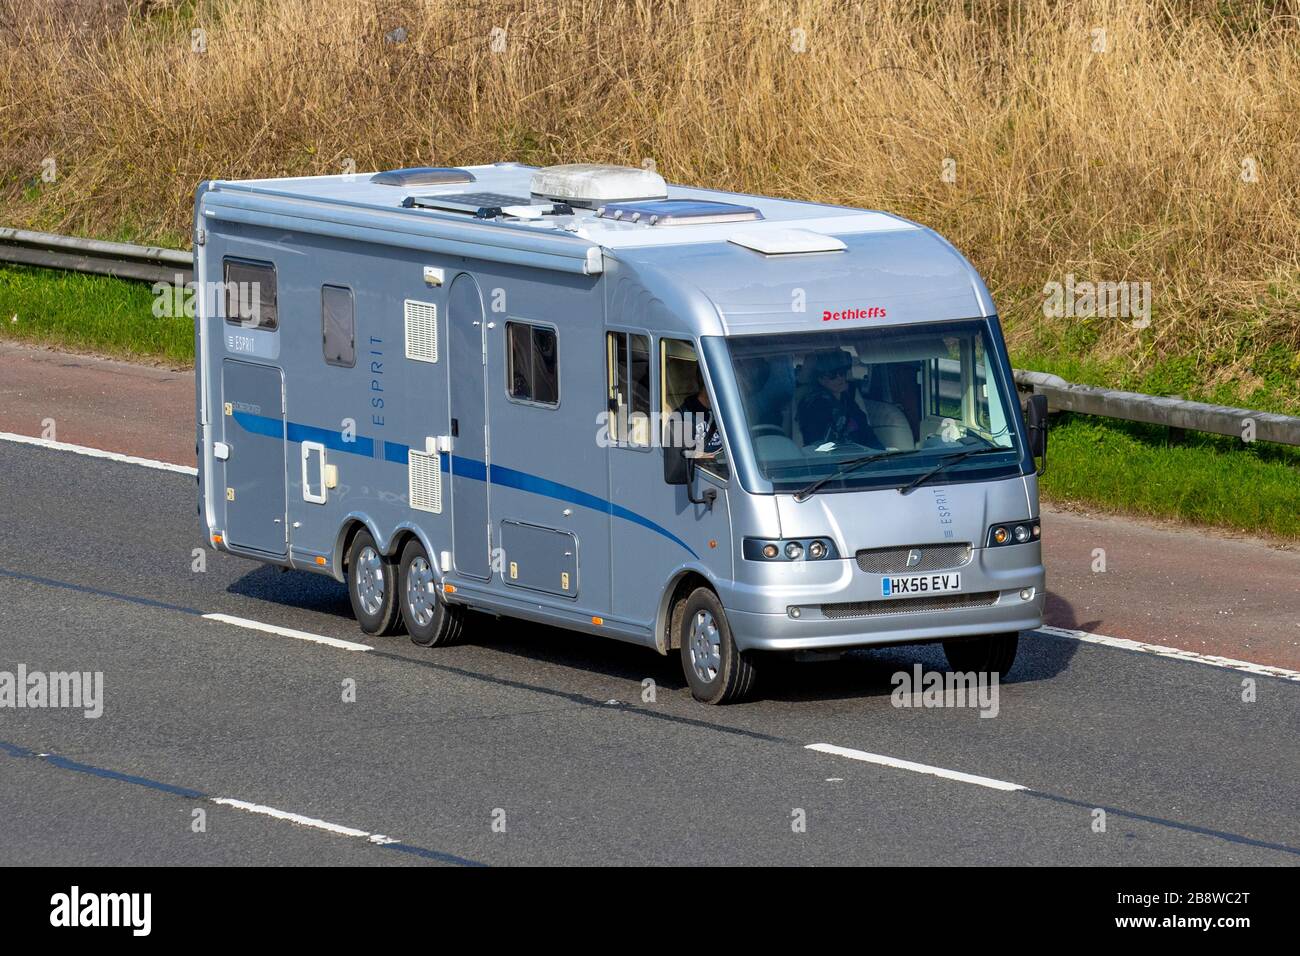 2006 Silver Fiat Esprit Dethleffs Touring Caravans and Motorhomes,  campervans, RV leisure vehicle, family holidays, vacations, caravan  holiday, life on the road, M6 Motorway Manchester, UK Stock Photo - Alamy